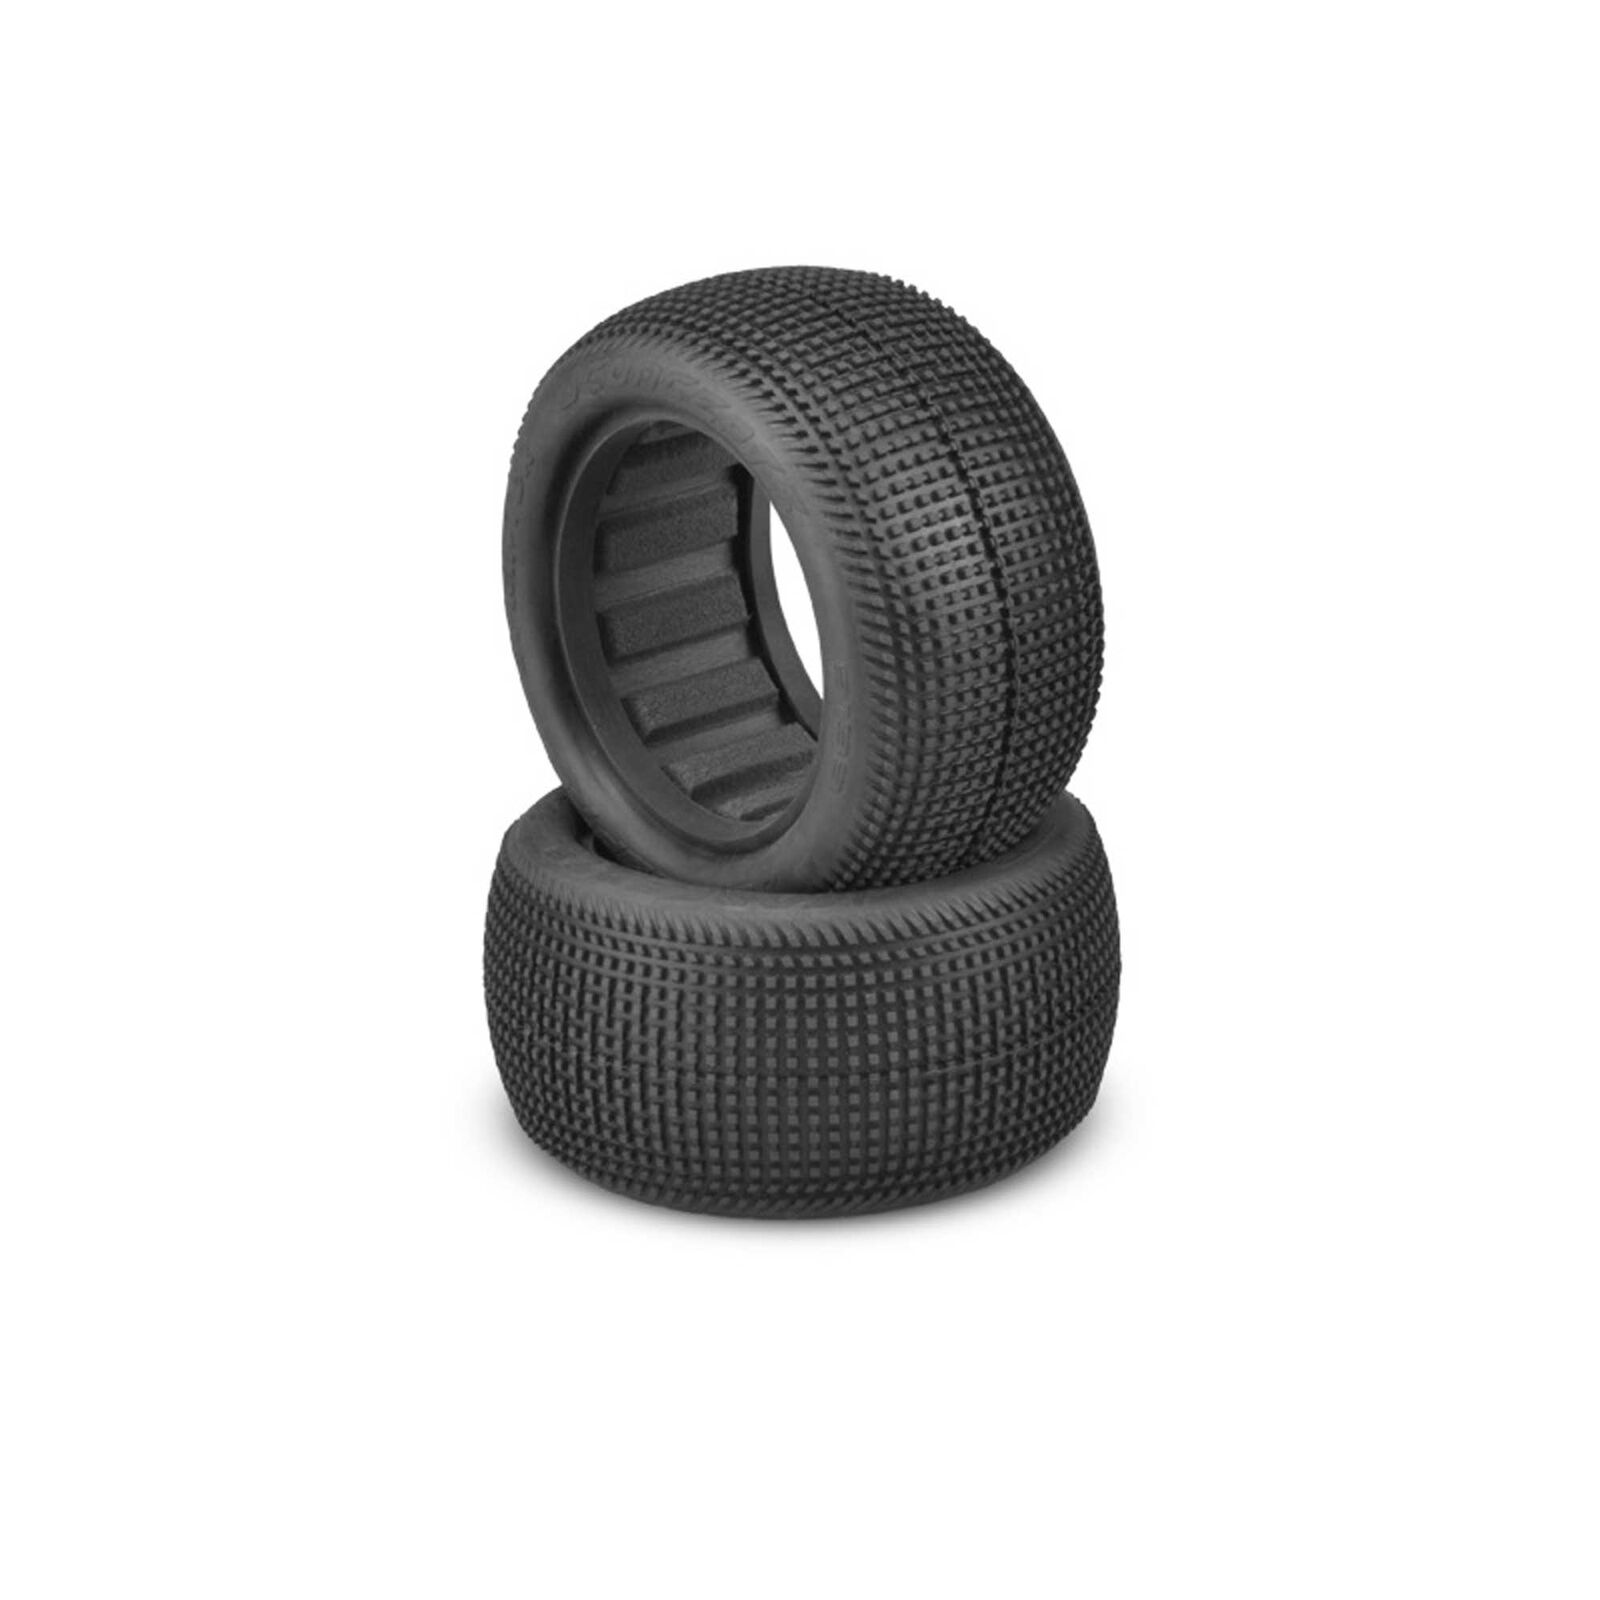 1/10 Sprinter 2.2” Rear Buggy Tires and Inserts, Green Compound (2)